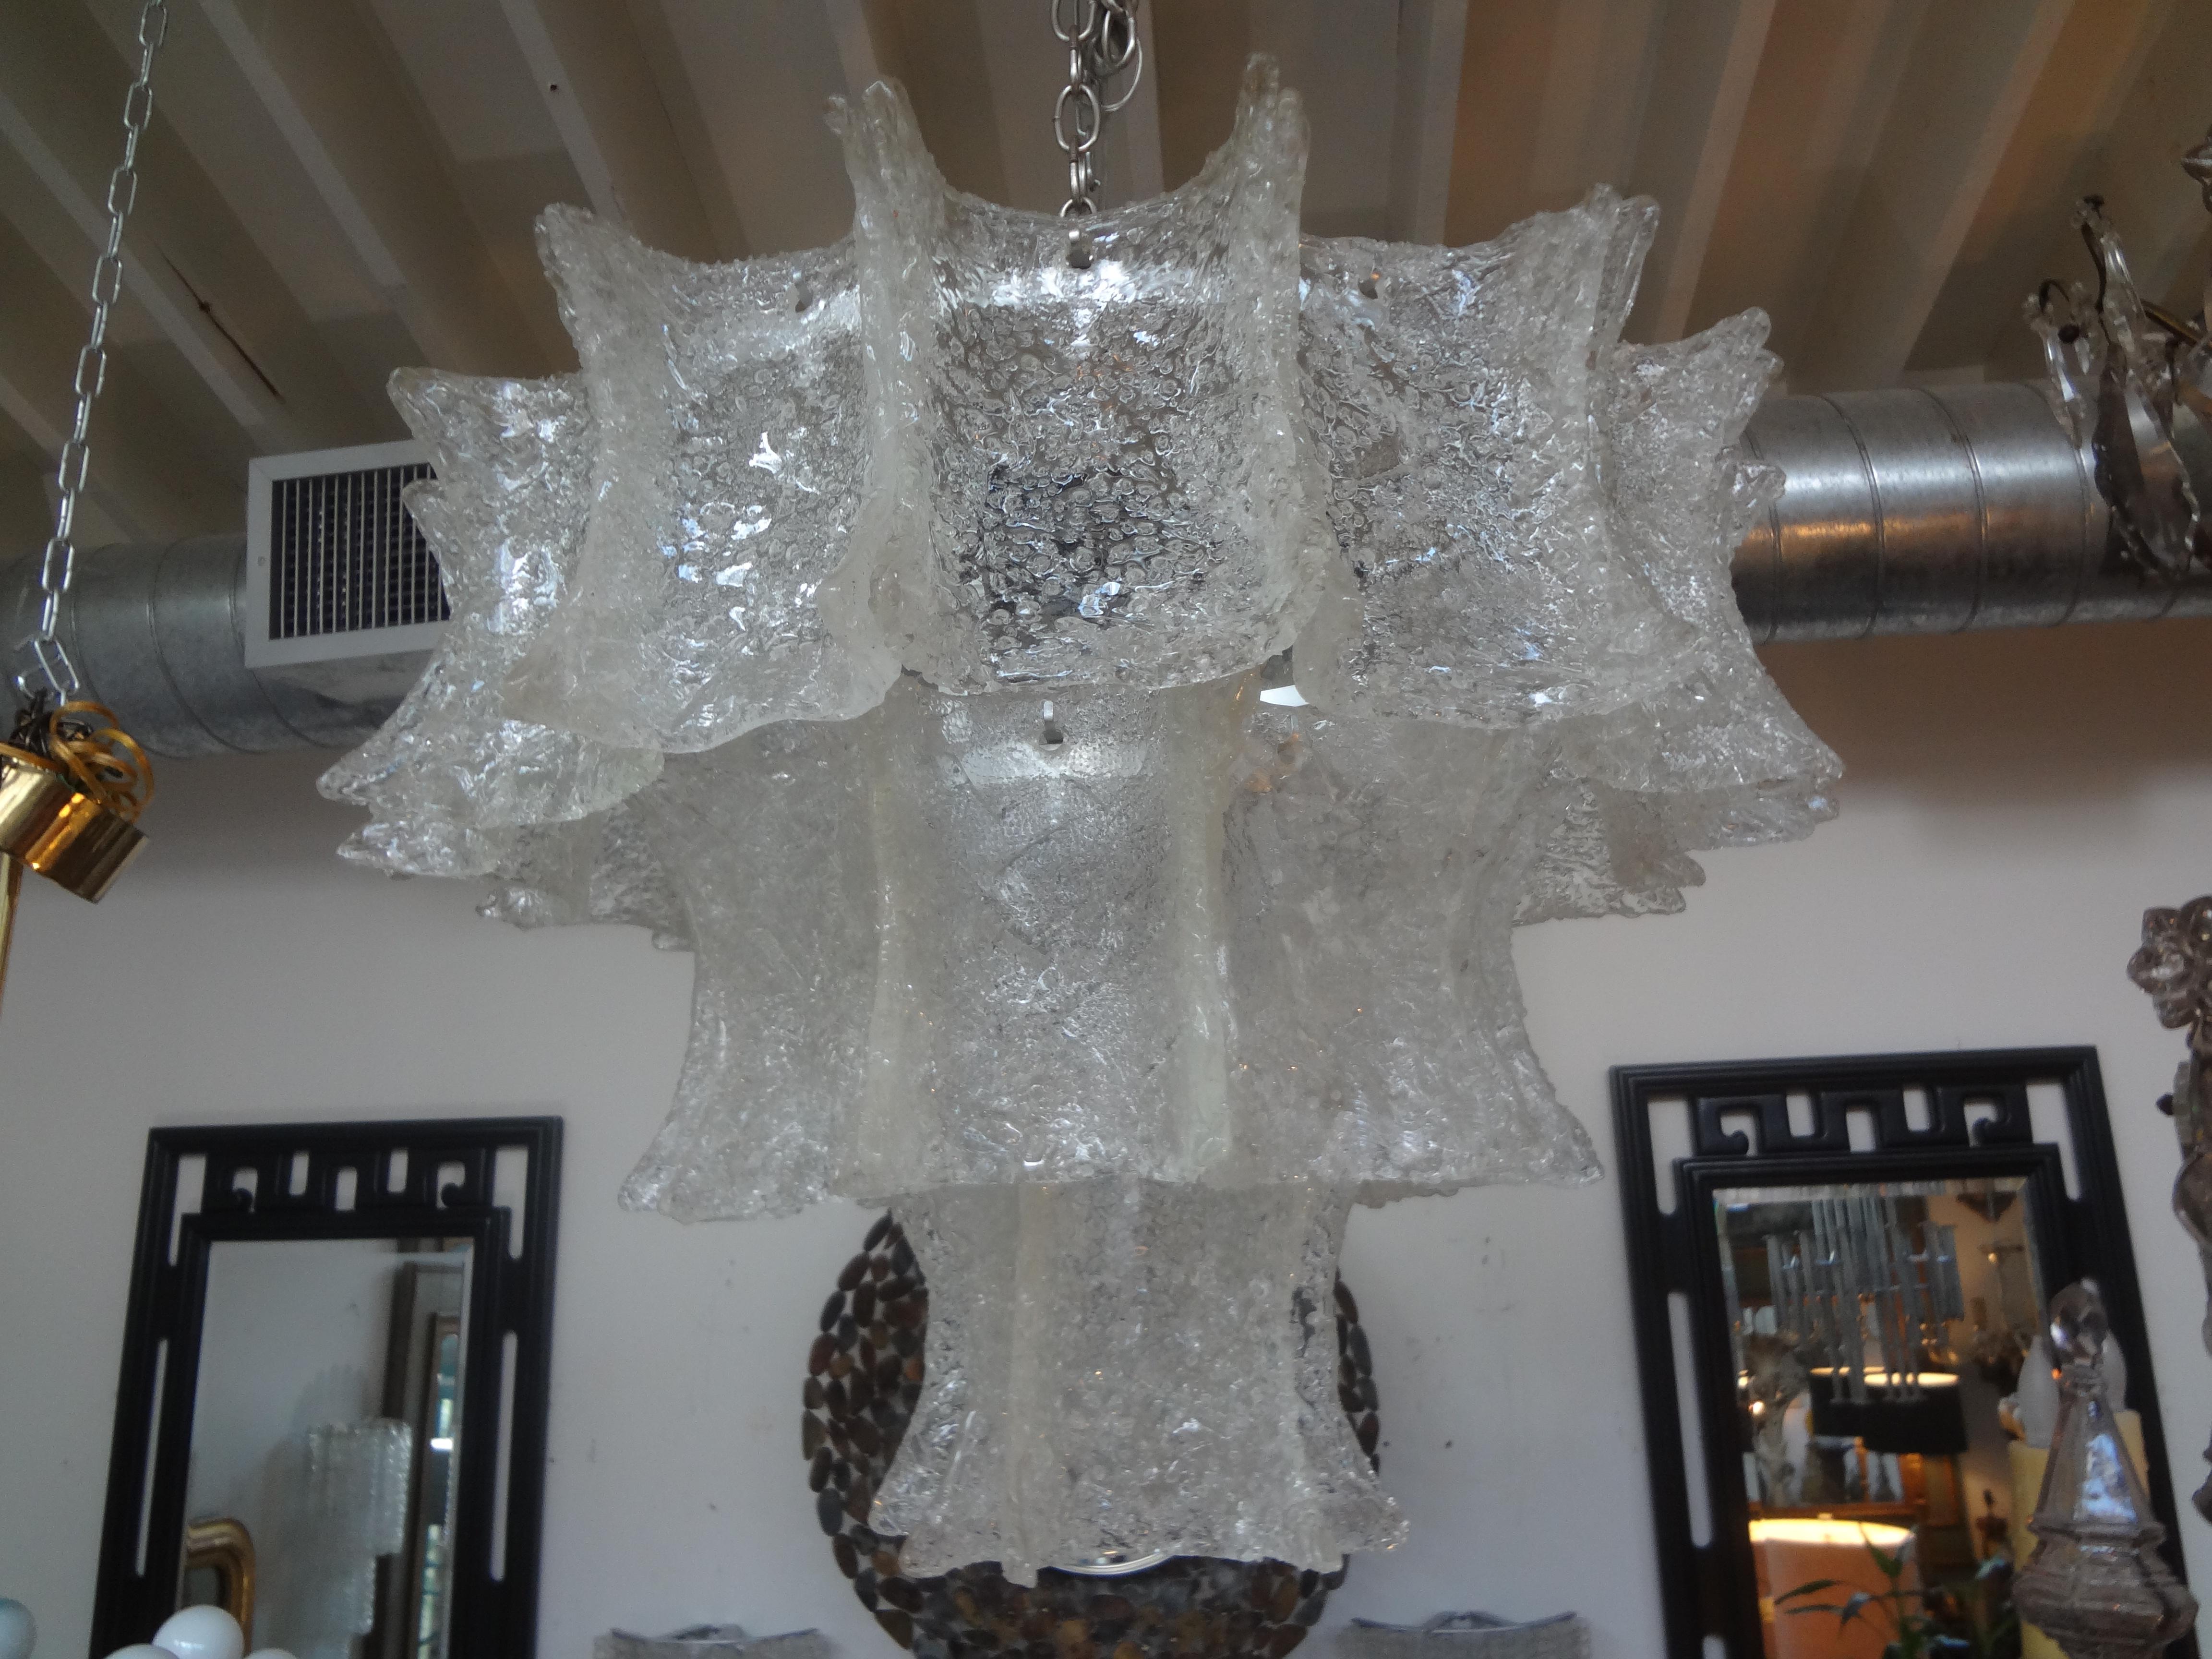 Mid-Century Modern Venini attributed Murano chandelier.
Mid-Century Modern Venini attributed Murano glass chandelier. 
This unusual Murano glass chandelier, lantern or pendant has been newly wired with new sockets for U.S application.
Height can